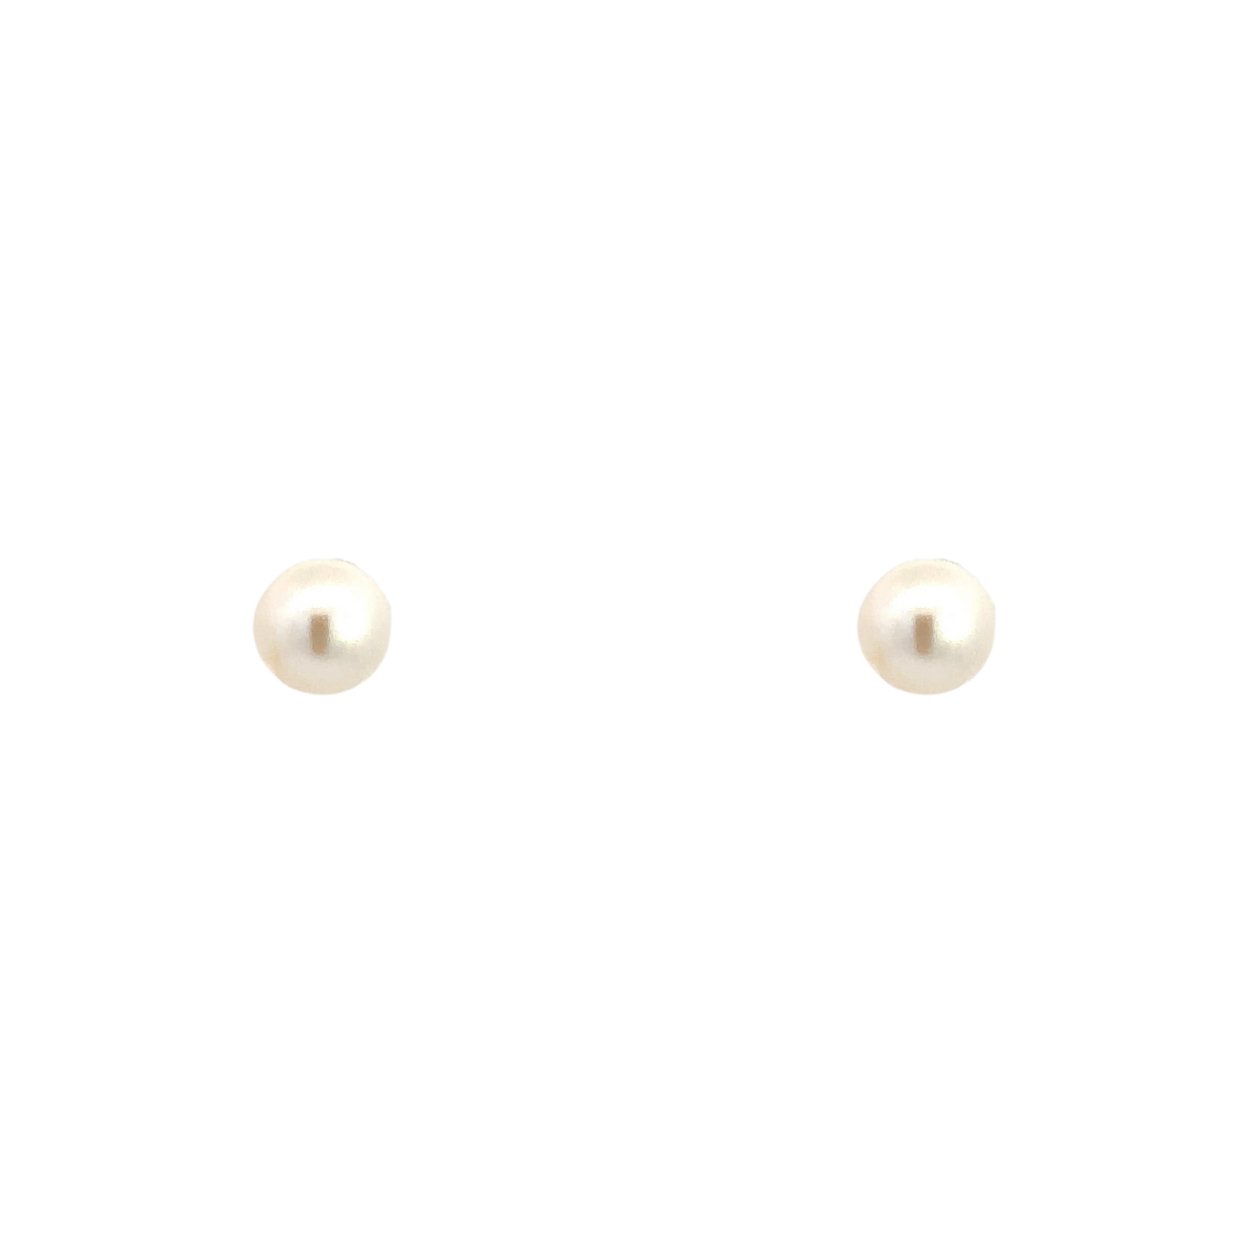 Mono Pearl Silver Stud Earrings Body Shape Collection by Natkina